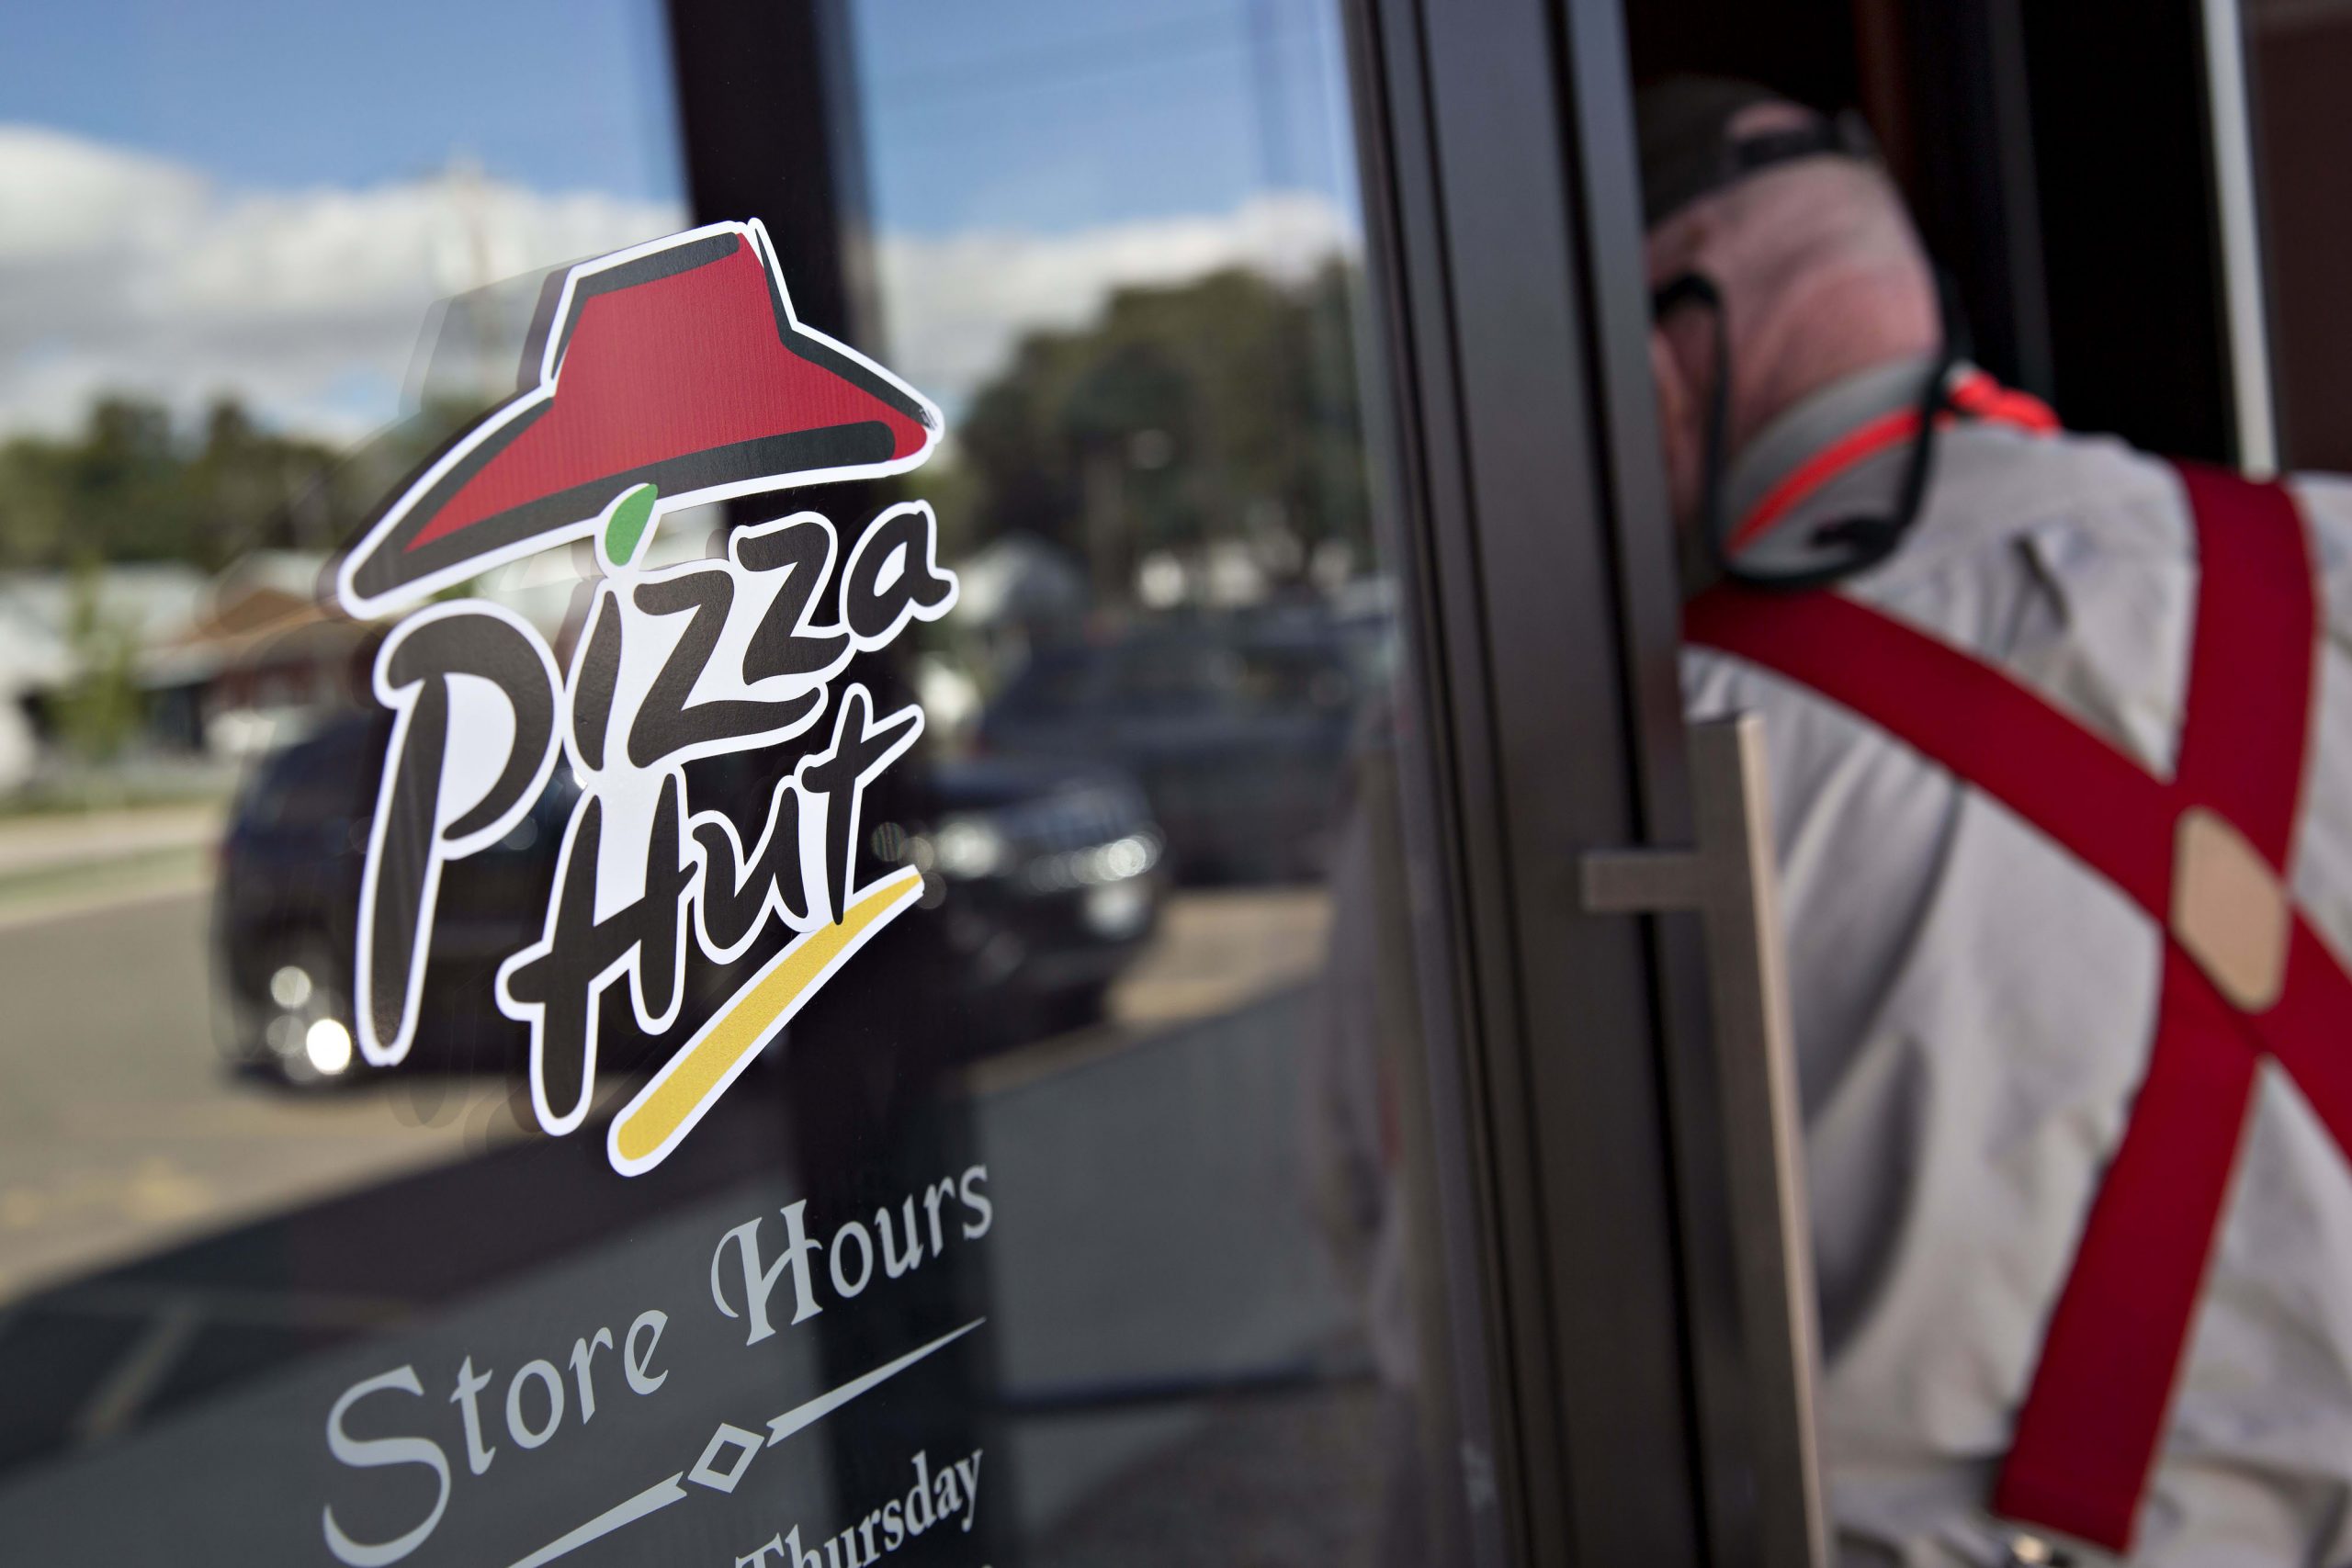 Applebee’s franchisee bids to purchase Pizza Hut’s largest U.S. operator